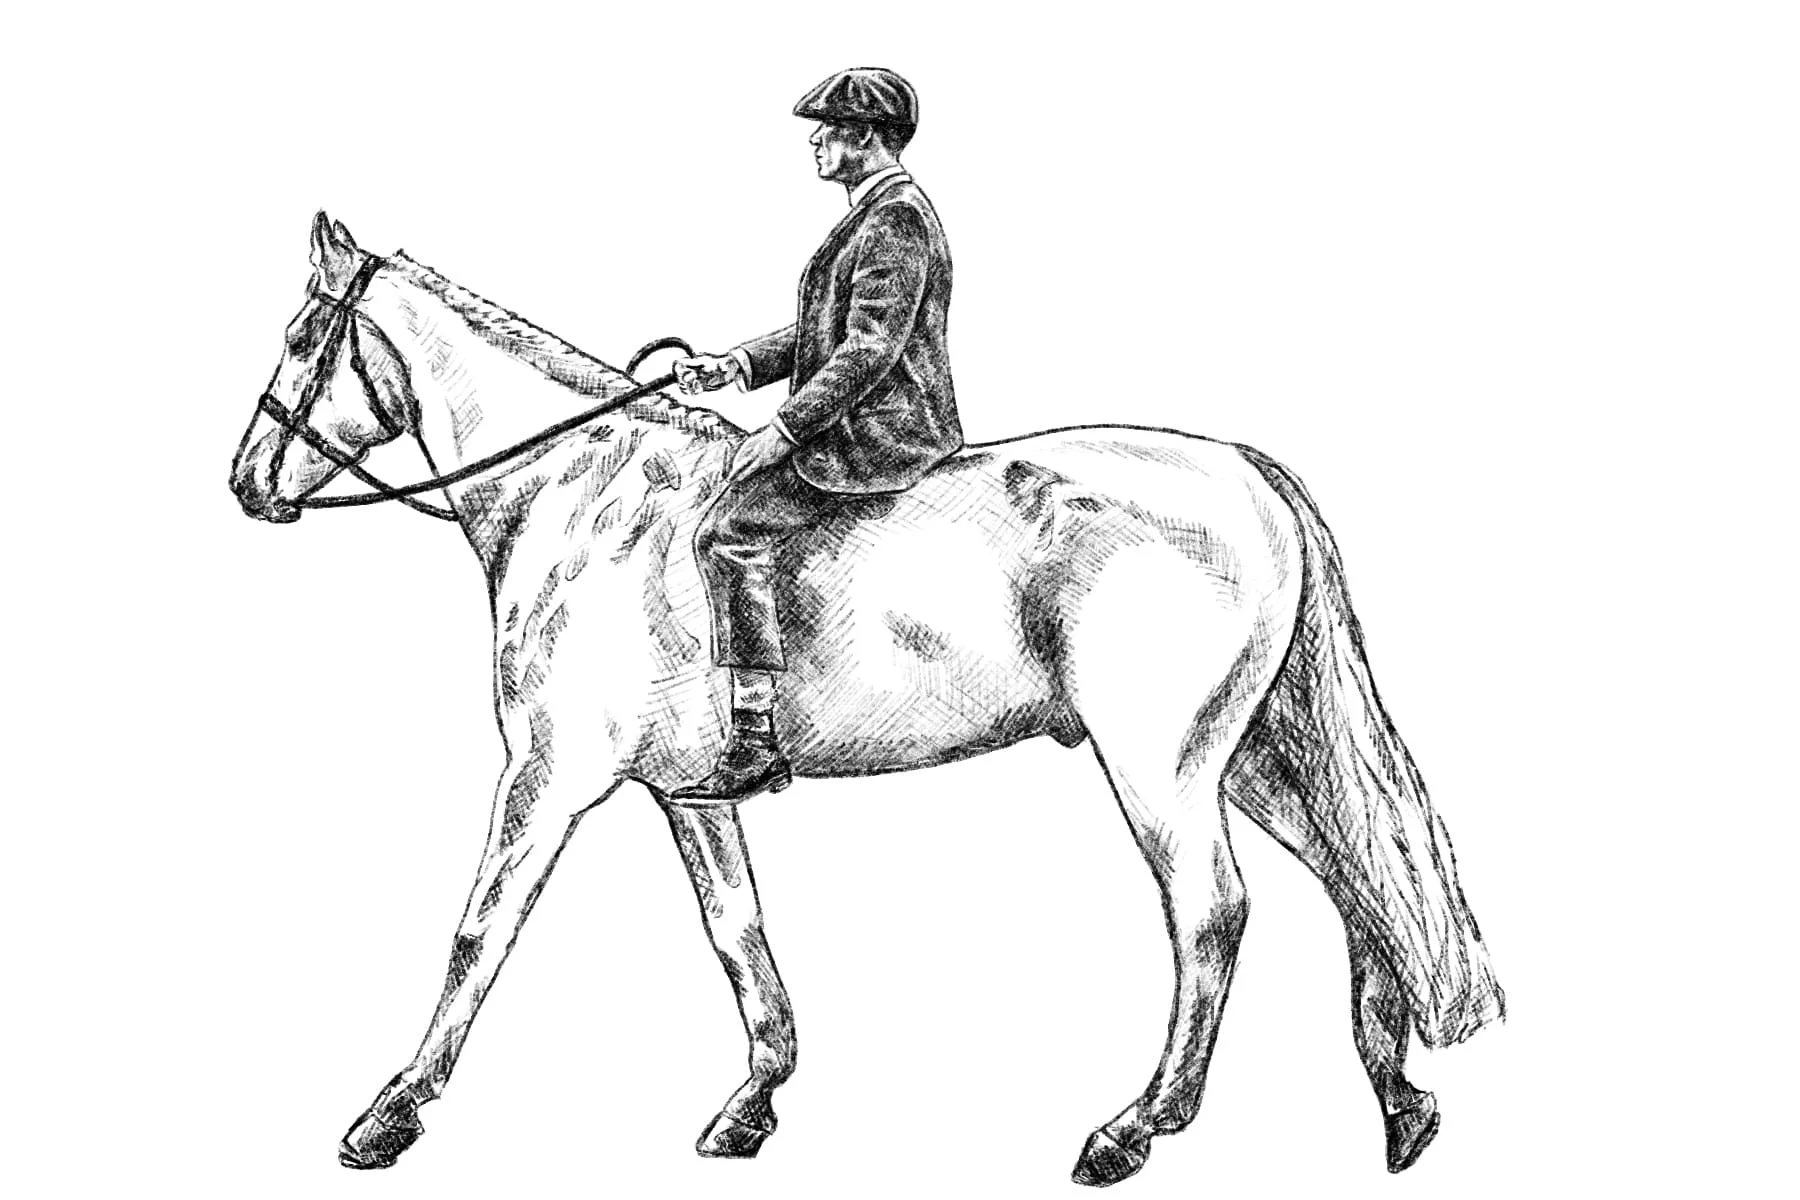 Digital drawing of Thomas Shelby on horse